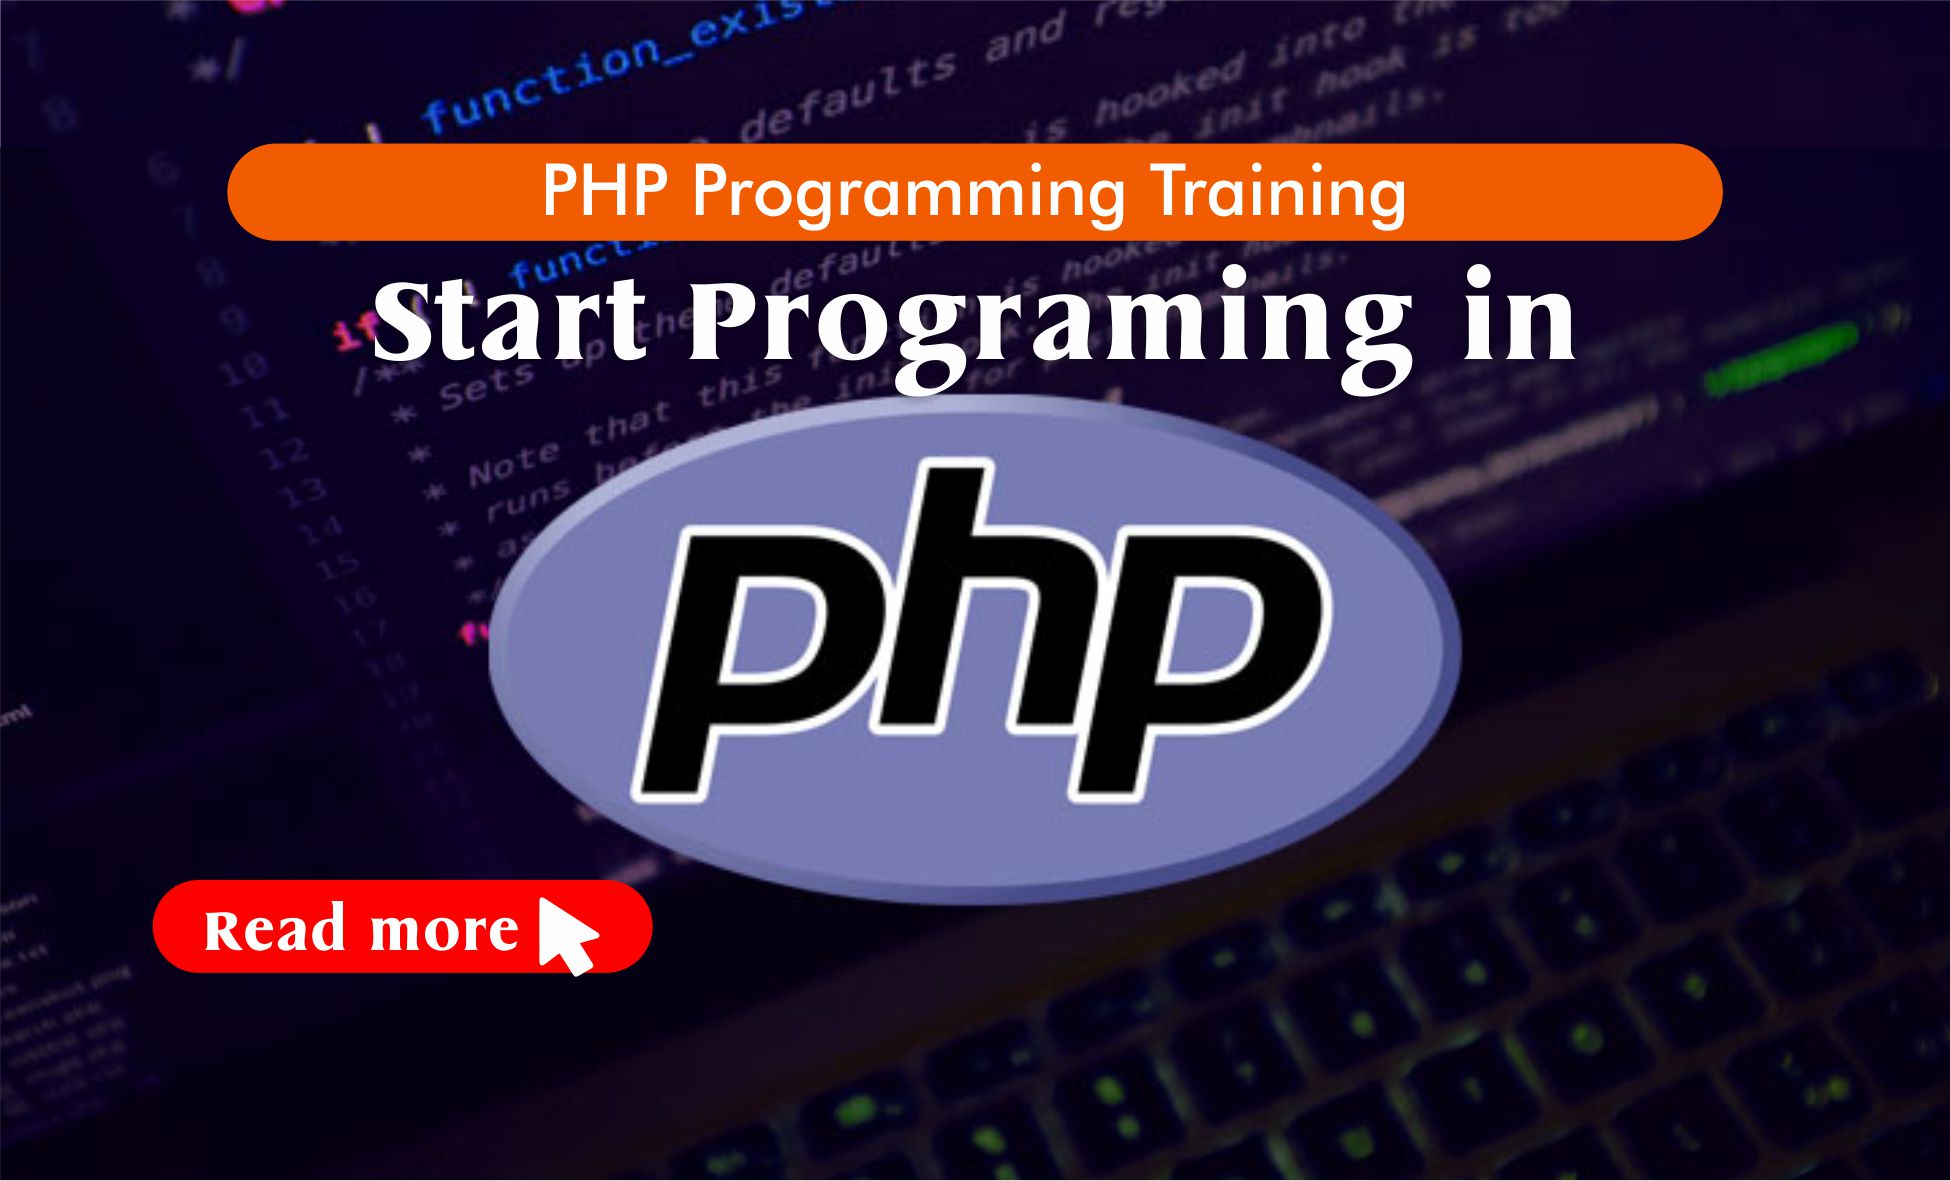 PHP Programing in Abuja stamsgroup.com